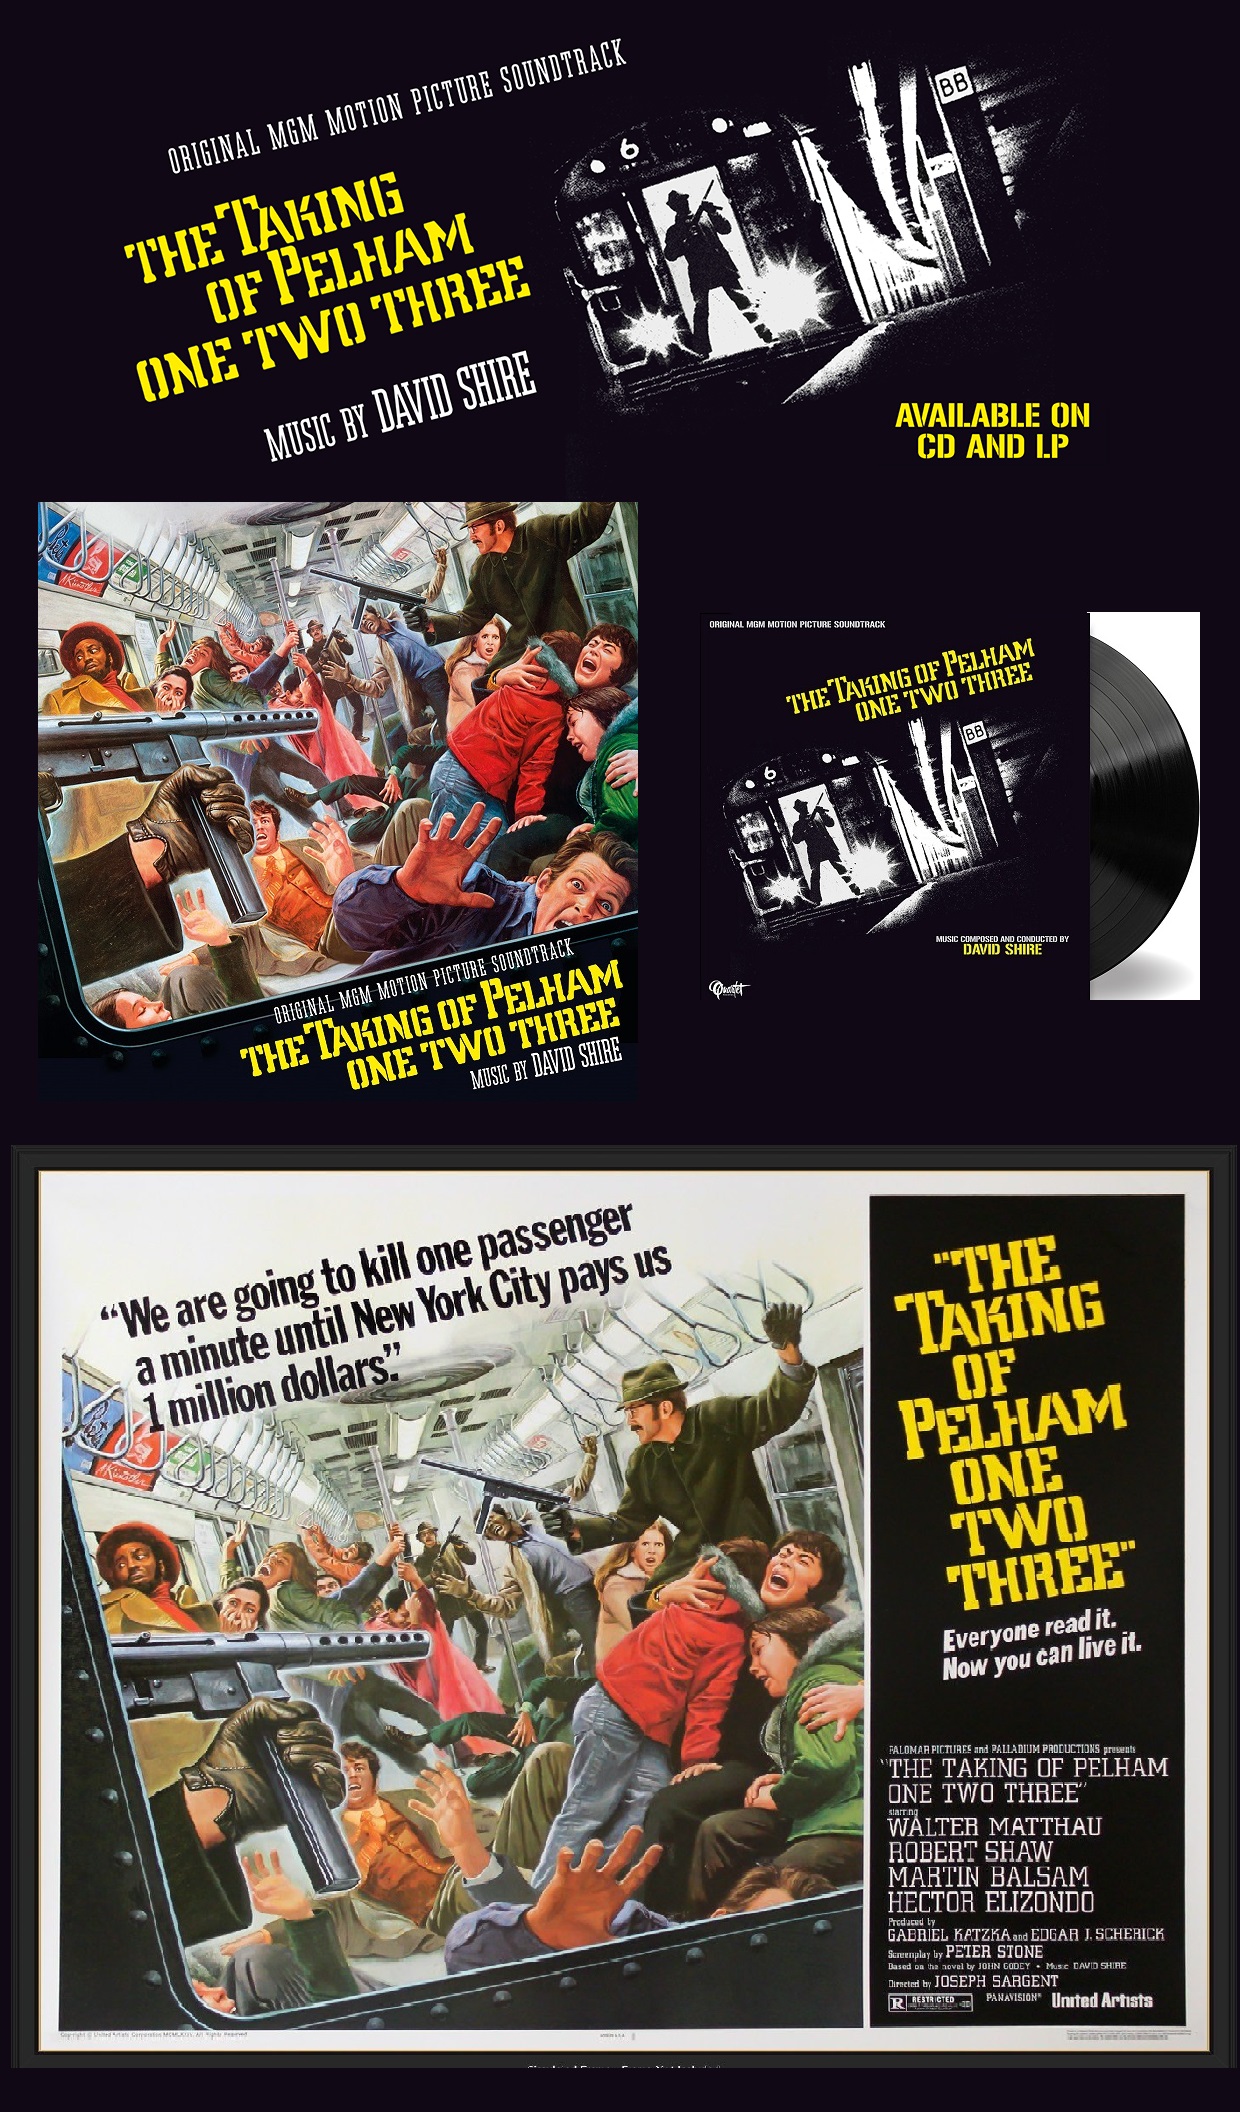 The Taking of Pelham One Two Three (LP and Cd)